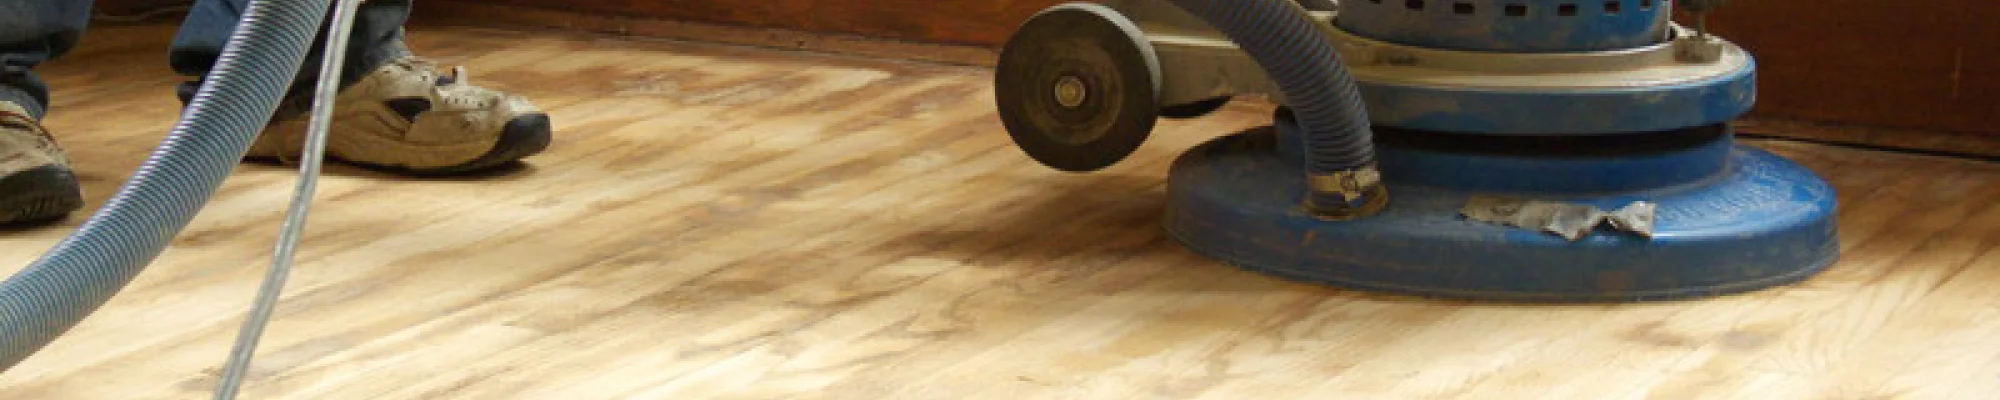 Learn more about the services provided by Gobin & Allion Flooring in Platteville, WI